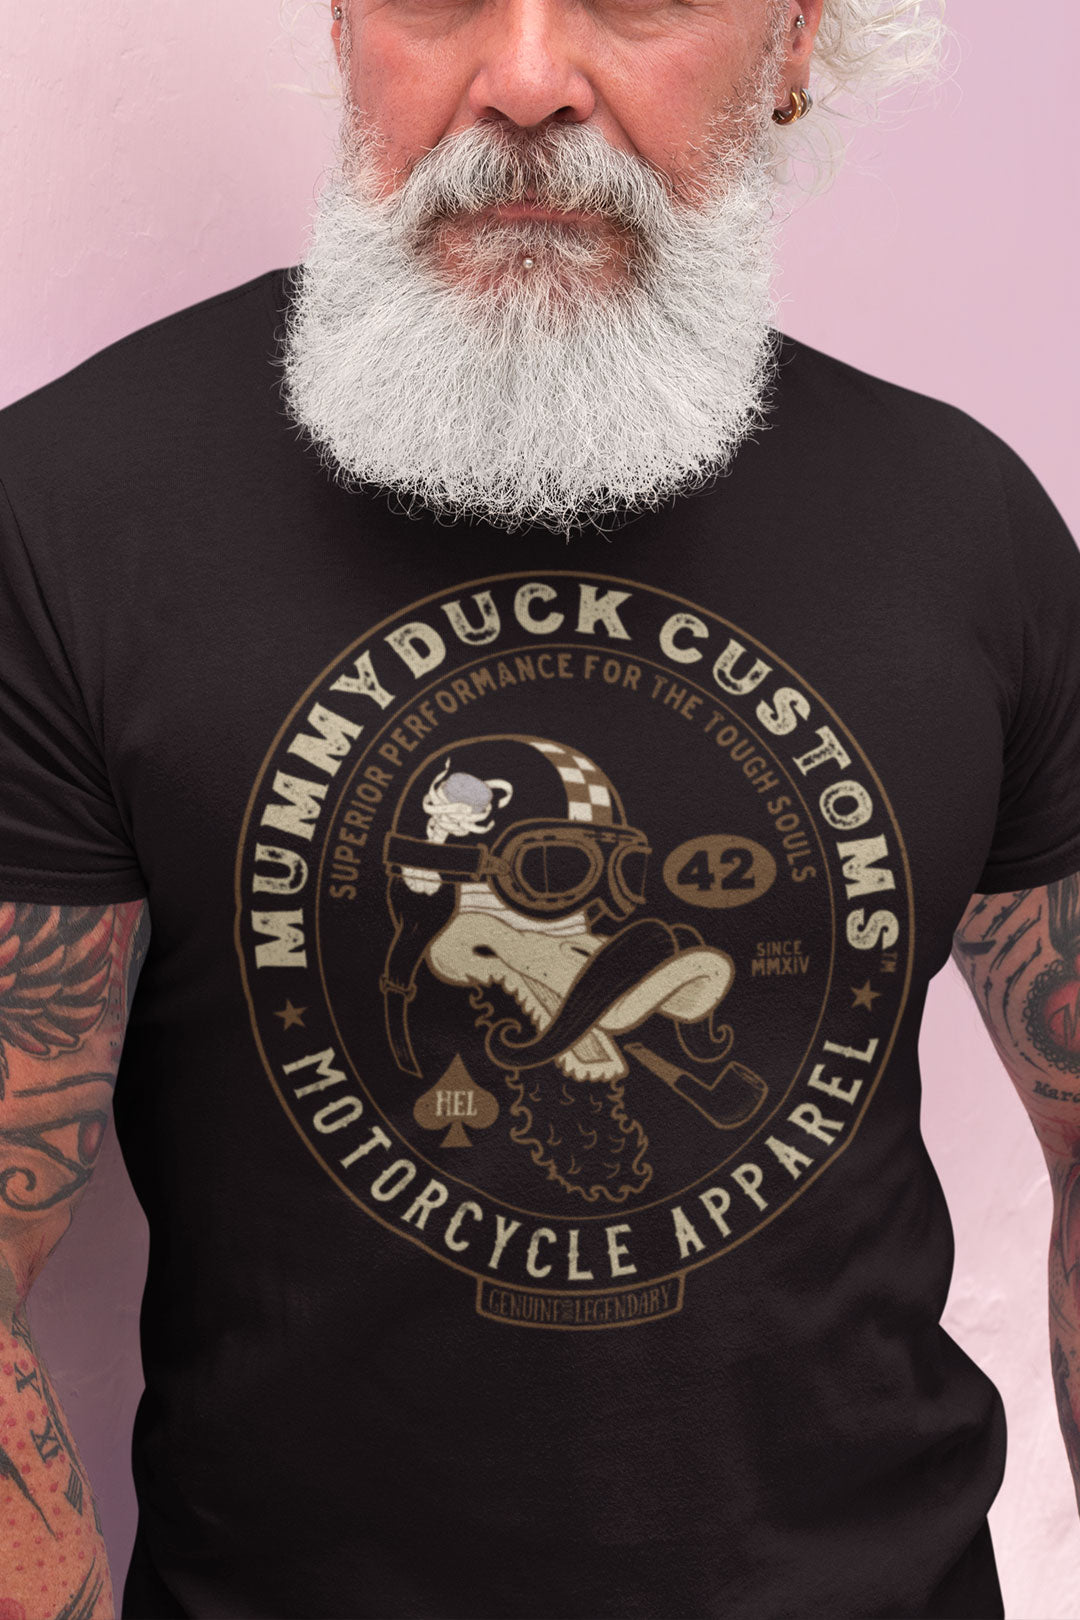 This Bearded Gentleman Motorcycle T-Shirt by Mummyduck Customs is everything you've dreamed of and more. It feels soft and lightweight, with the right amount of stretch. It's comfortable and flattering for all. Custom made from HEL.